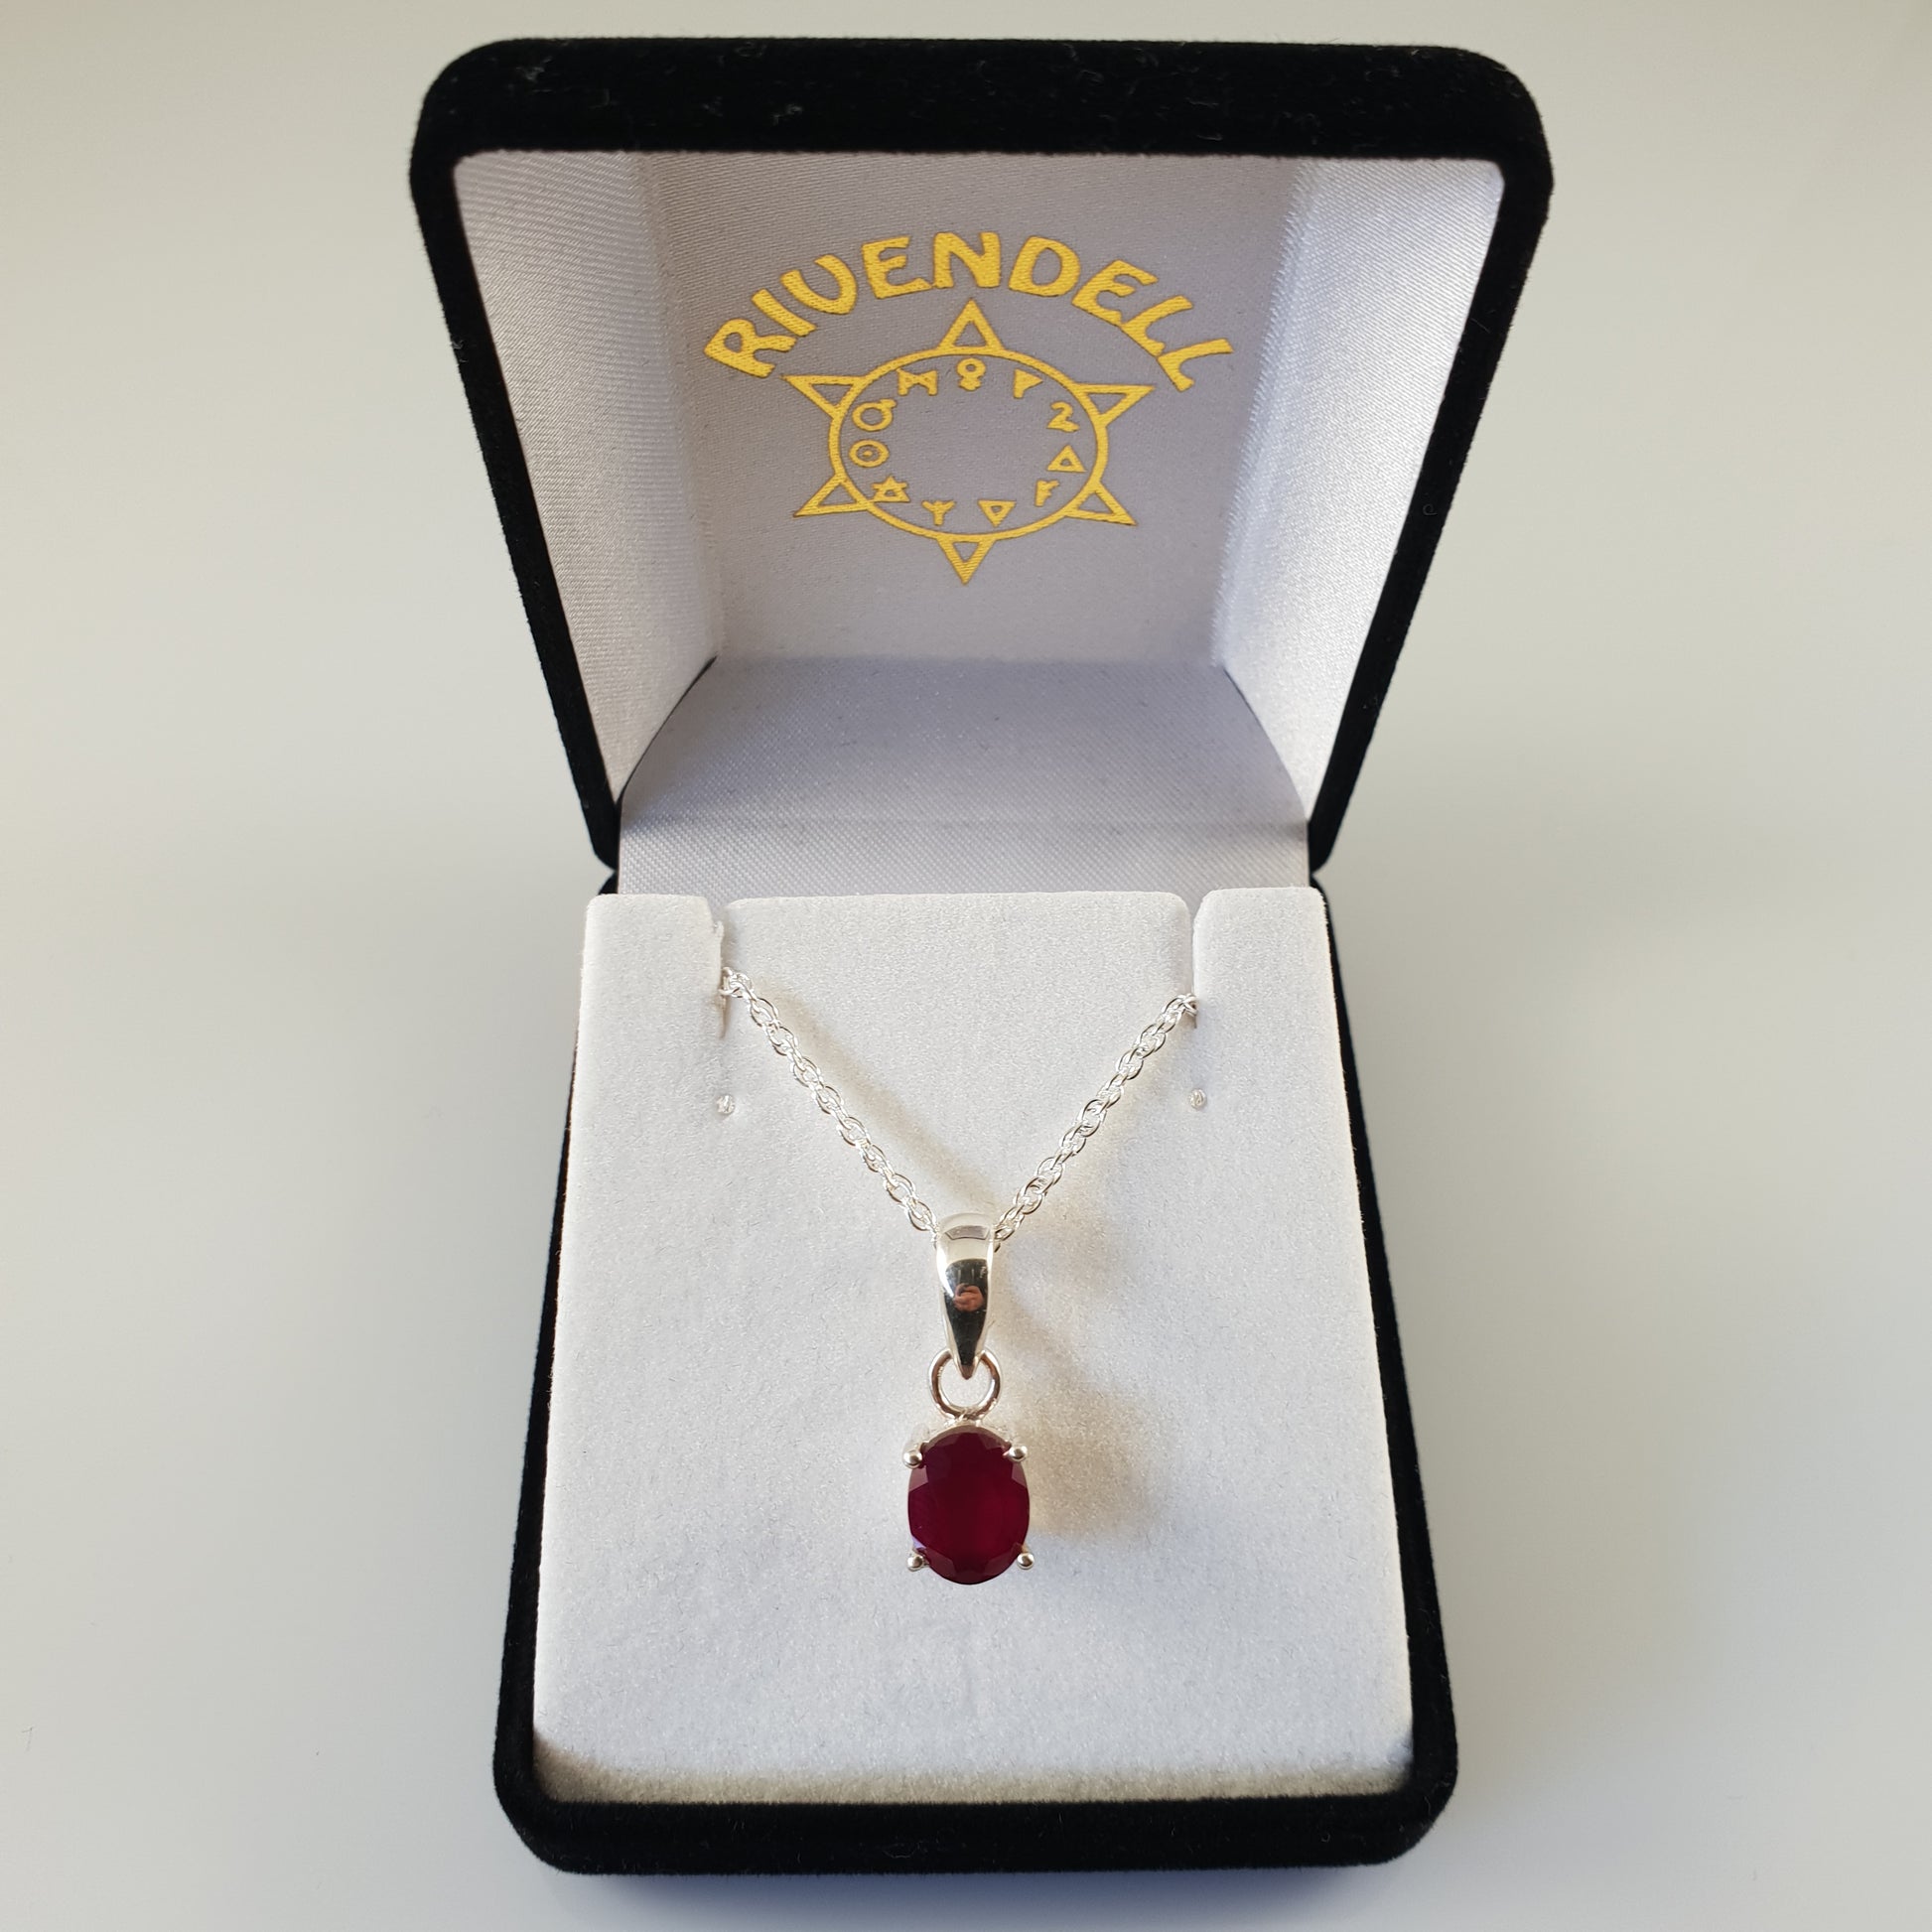 Oval Ruby 925 Stirling Silver Pendant - Rivendell Shop